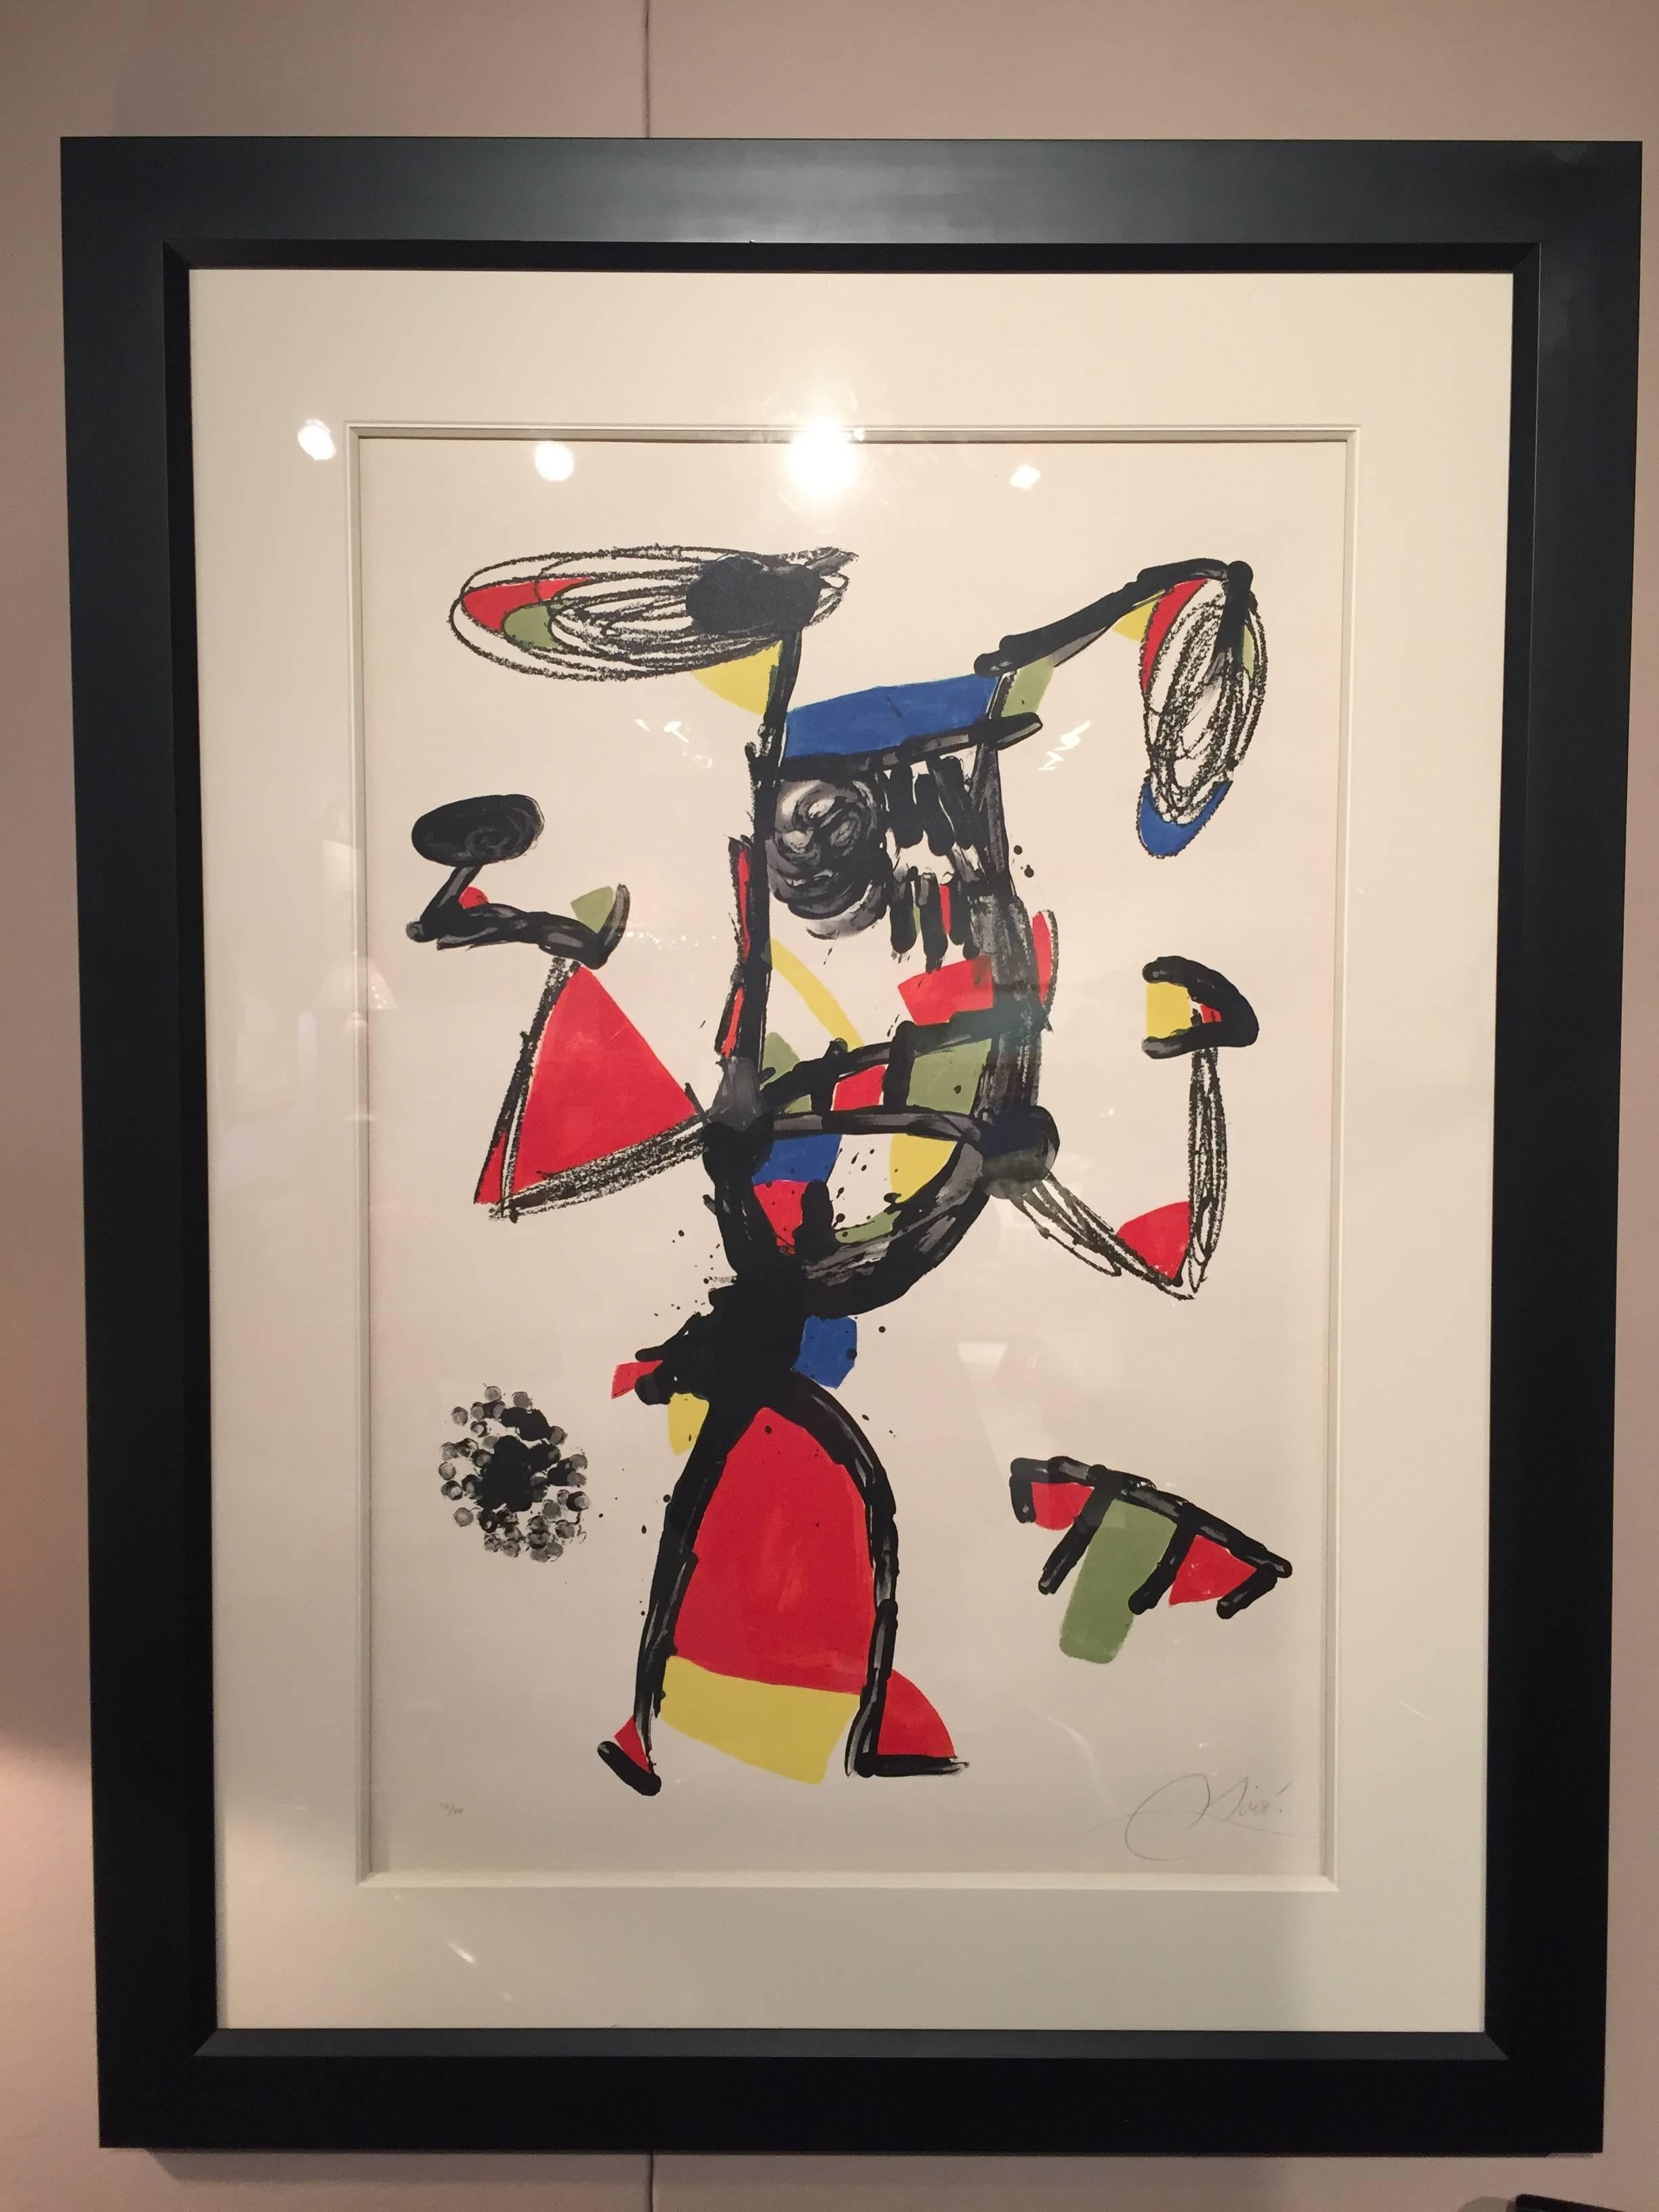 Joan Miro Majorette color lithograph pencil signed lower right, numbered 16/75 in a beveled black wide frame,under glass 51'' tall by 38'' wide.
Joan Miro 1893-1983 Spanish painter and world famous artist.